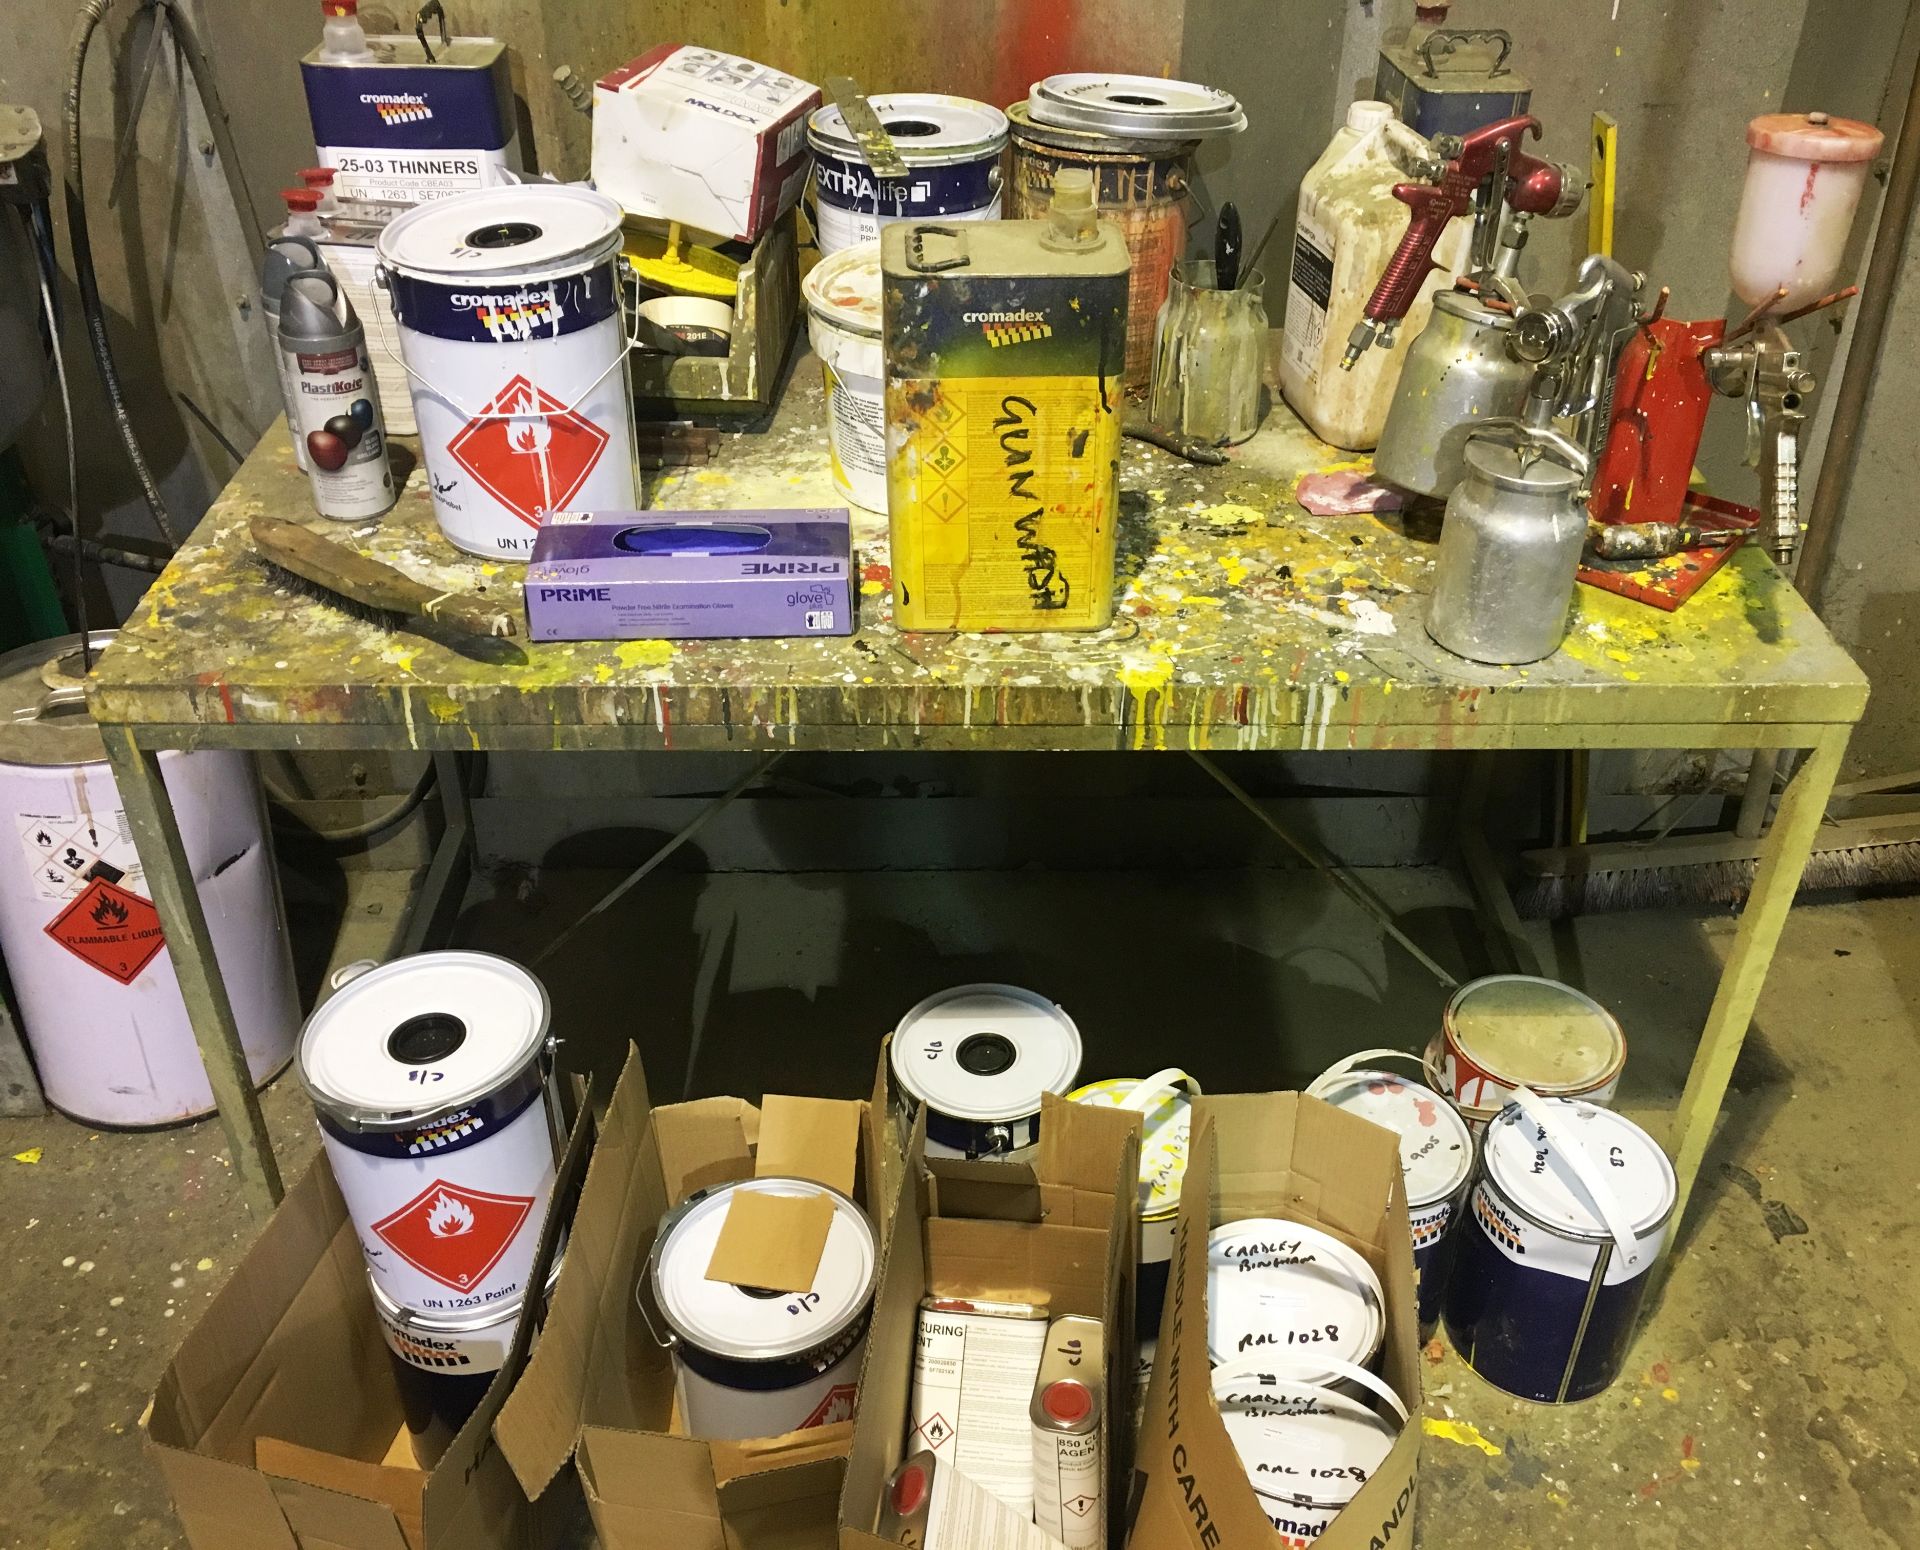 Quantity of Paints, Thinners, Curing Agents & Spray Guns - All items must be removed from site